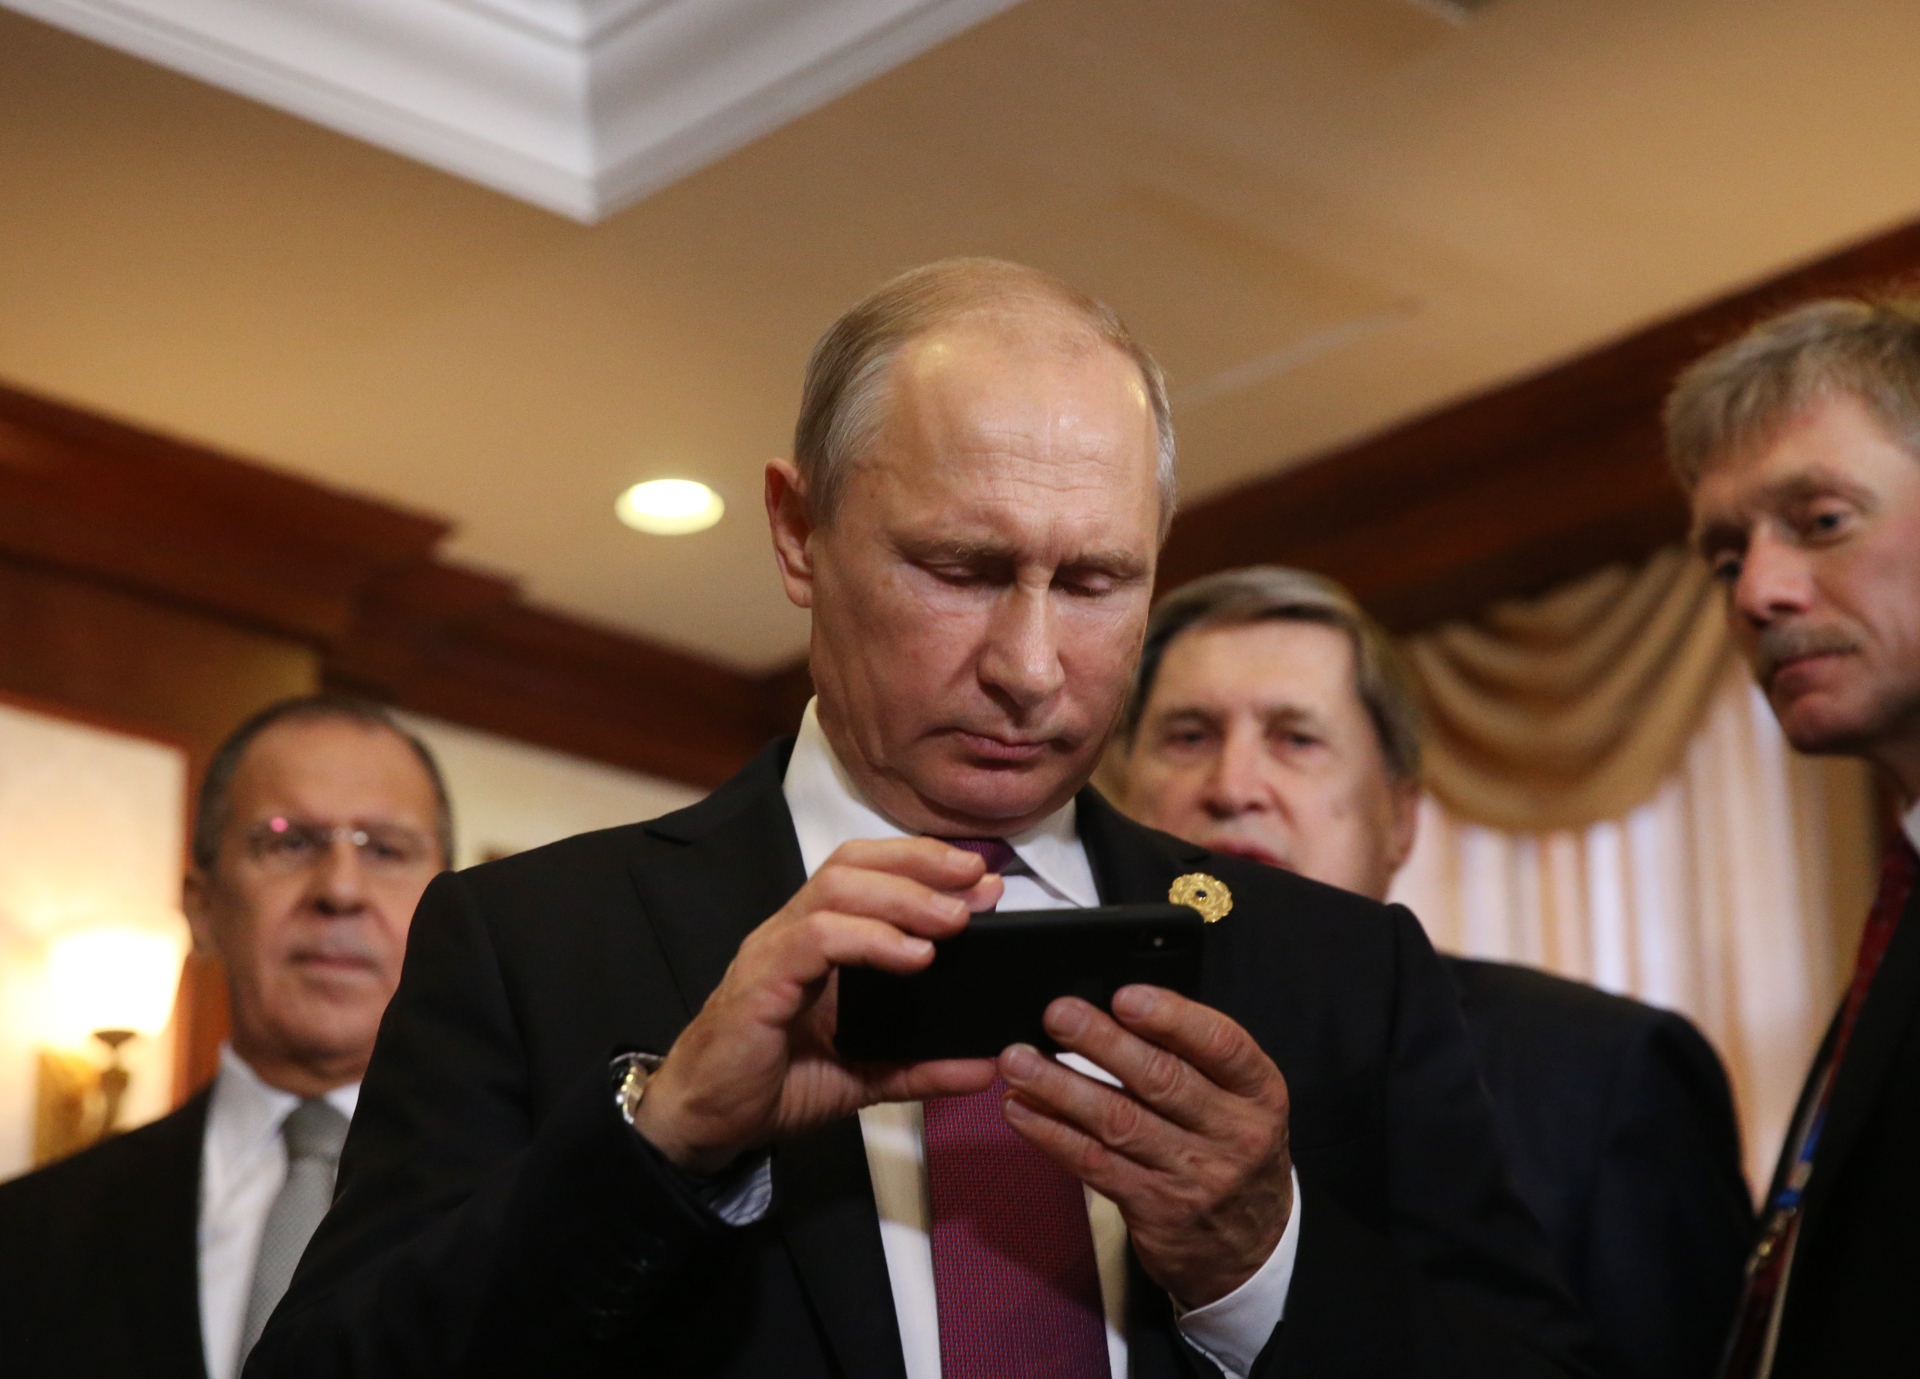 Vladimir Putin examines an iPhone in the company of spokesman Dmitri Peskov (right) and Foreign Minister Sergei Lavrov (left)